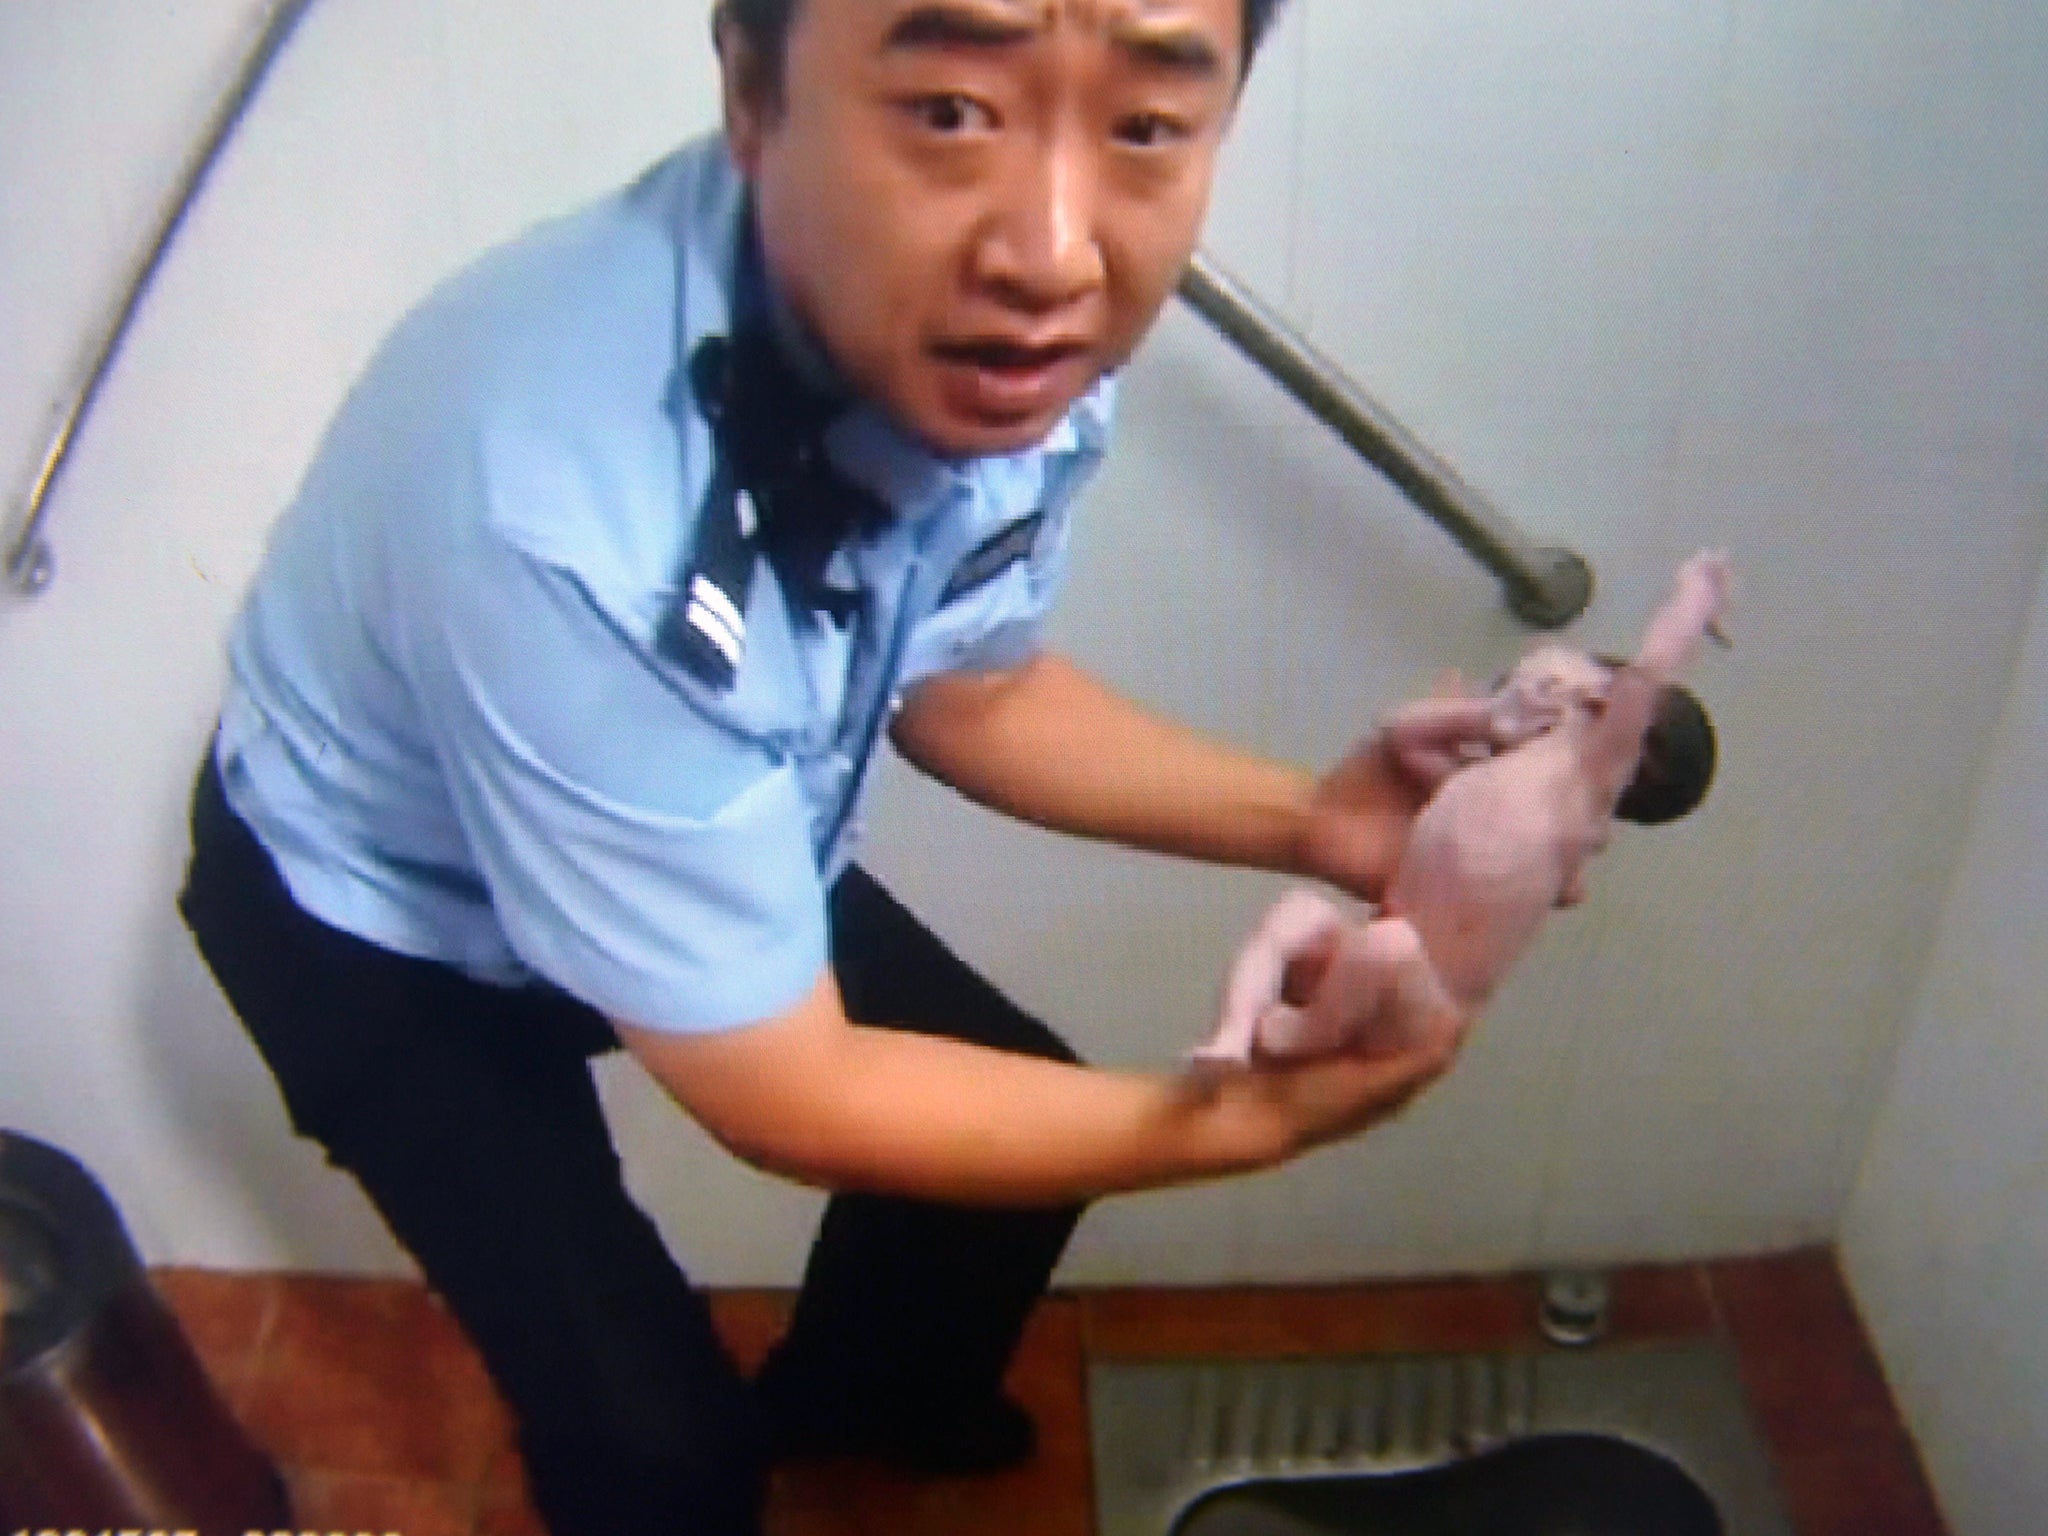 A policeman holding an abandoned newborn baby in a public toilet in Beijing. A newborn baby girl was abandoned in a Beijing public toilet and fell head-first down the pipe, reports said, after her mother apparently gave birth in the facility